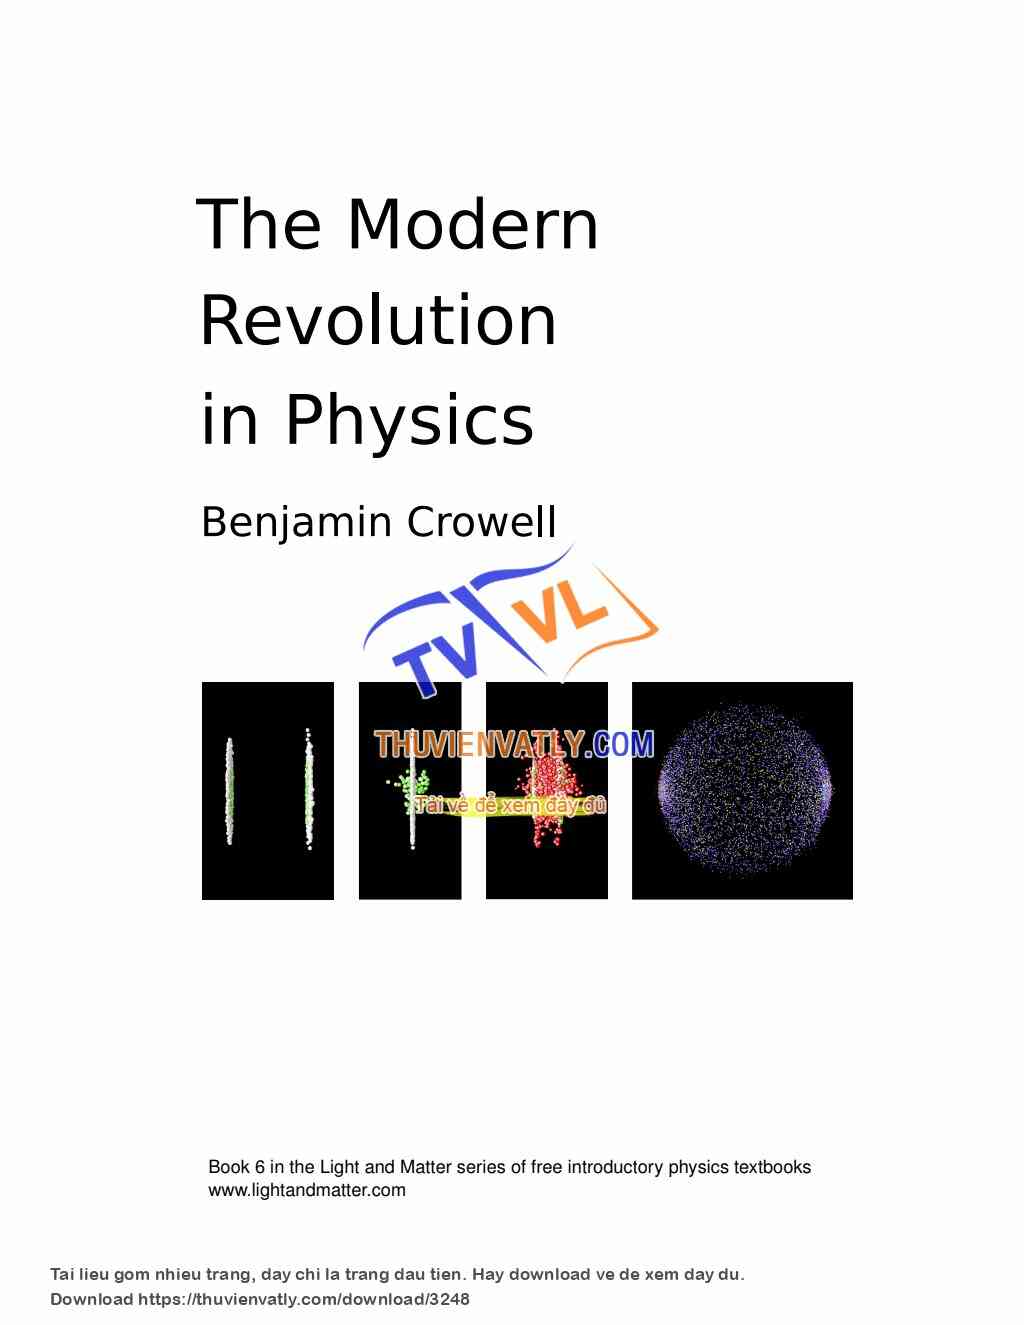 The Modern Revolution in Physics (Benjamin Crowell)